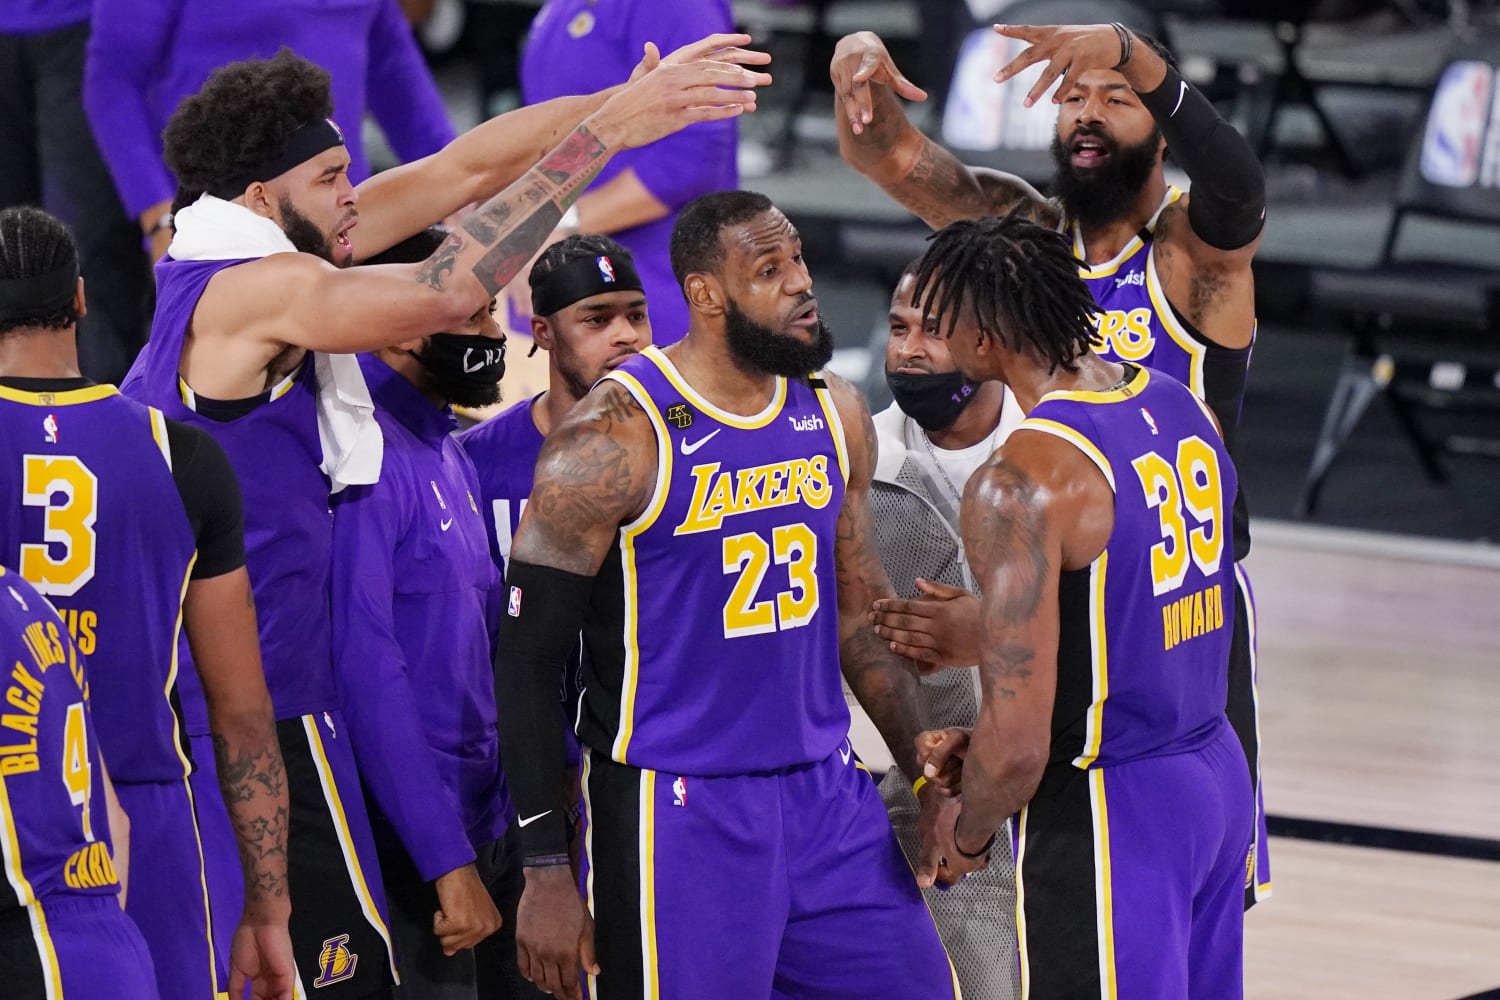 Lakers make conference finals; LeBron James gets his moment - Los